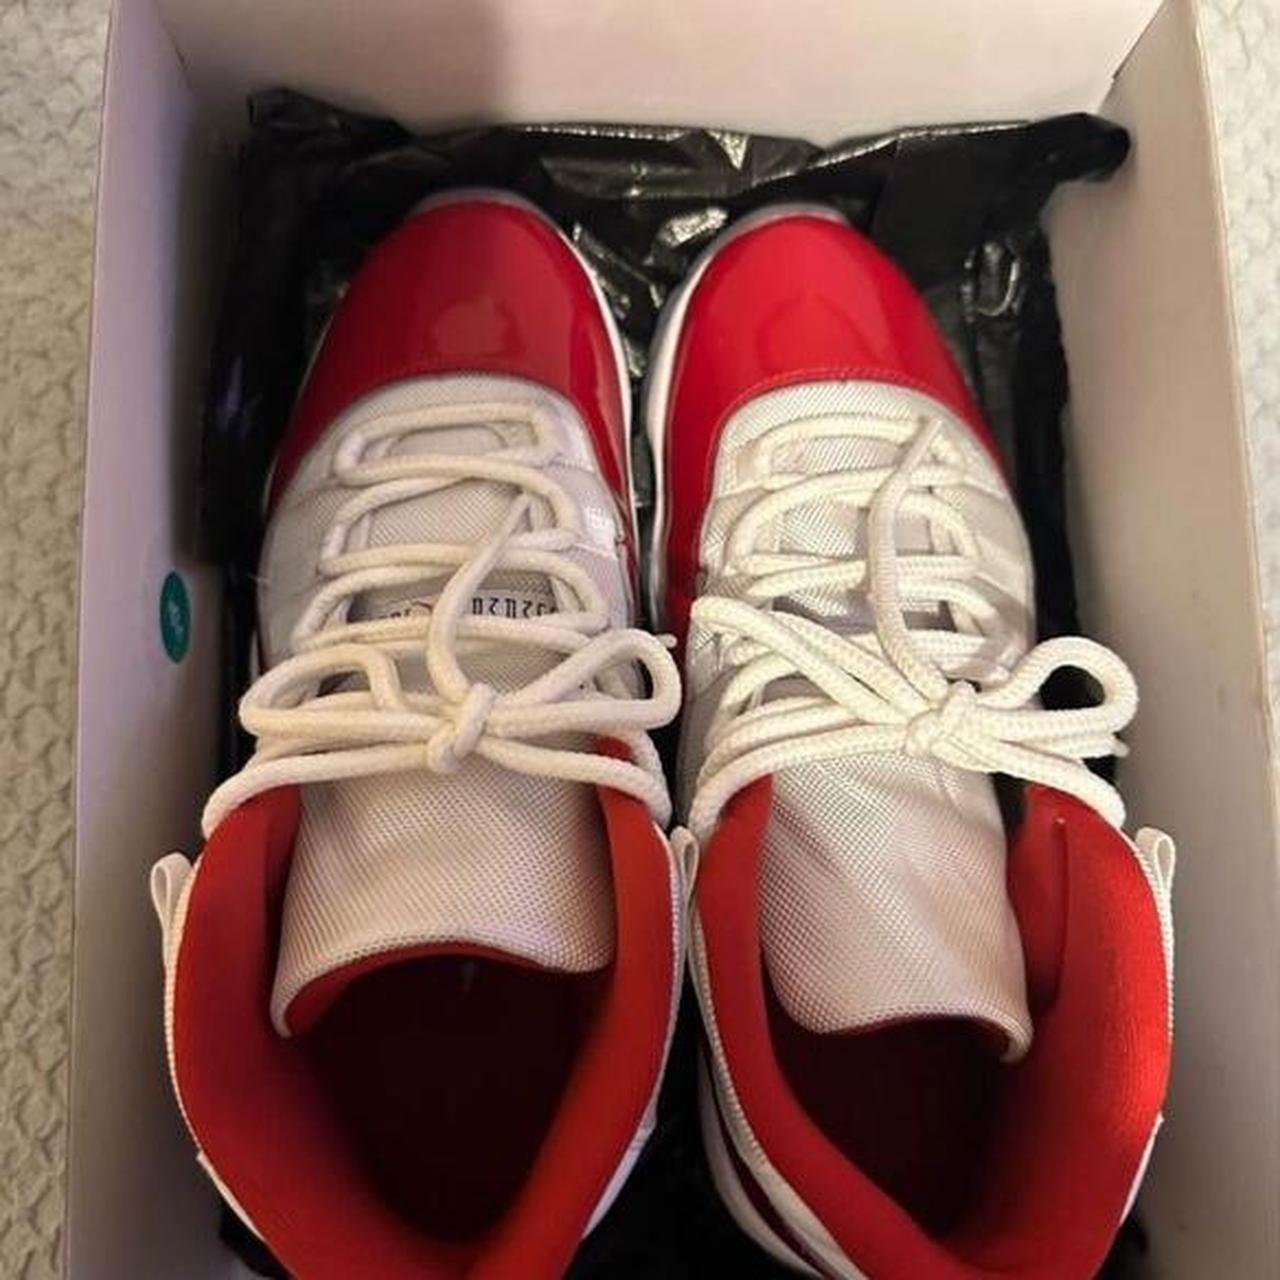 Cherry 11s brand new not my style or size - Depop